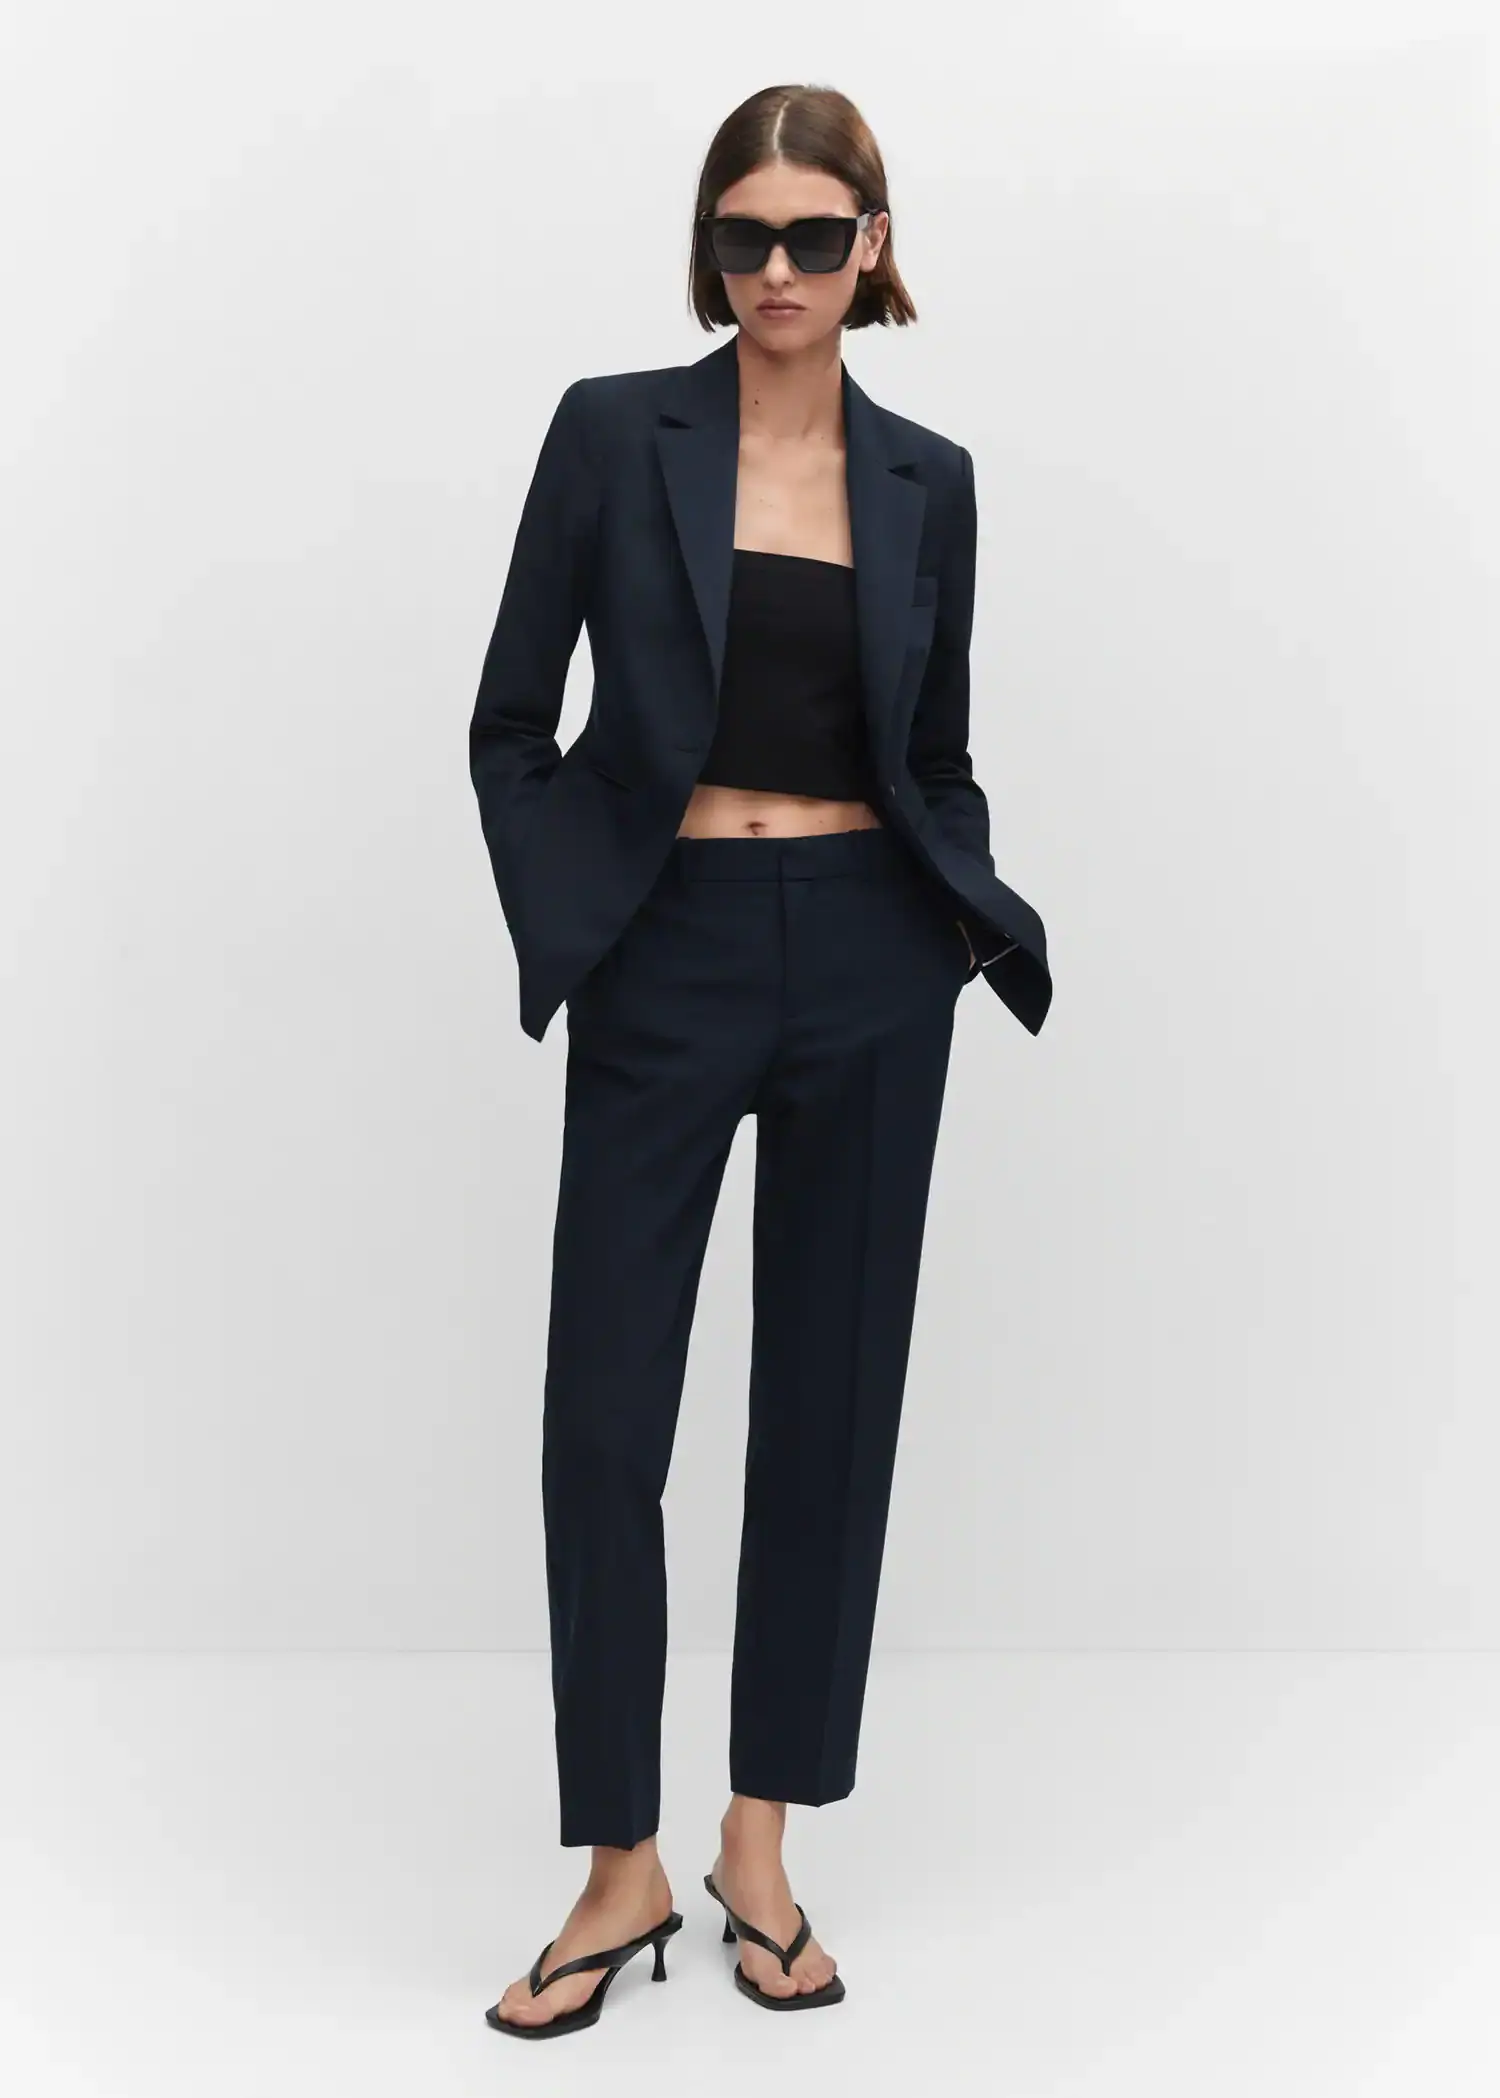 Mango Fitted suit jacket. a woman in a black suit stands in front of a white wall. 